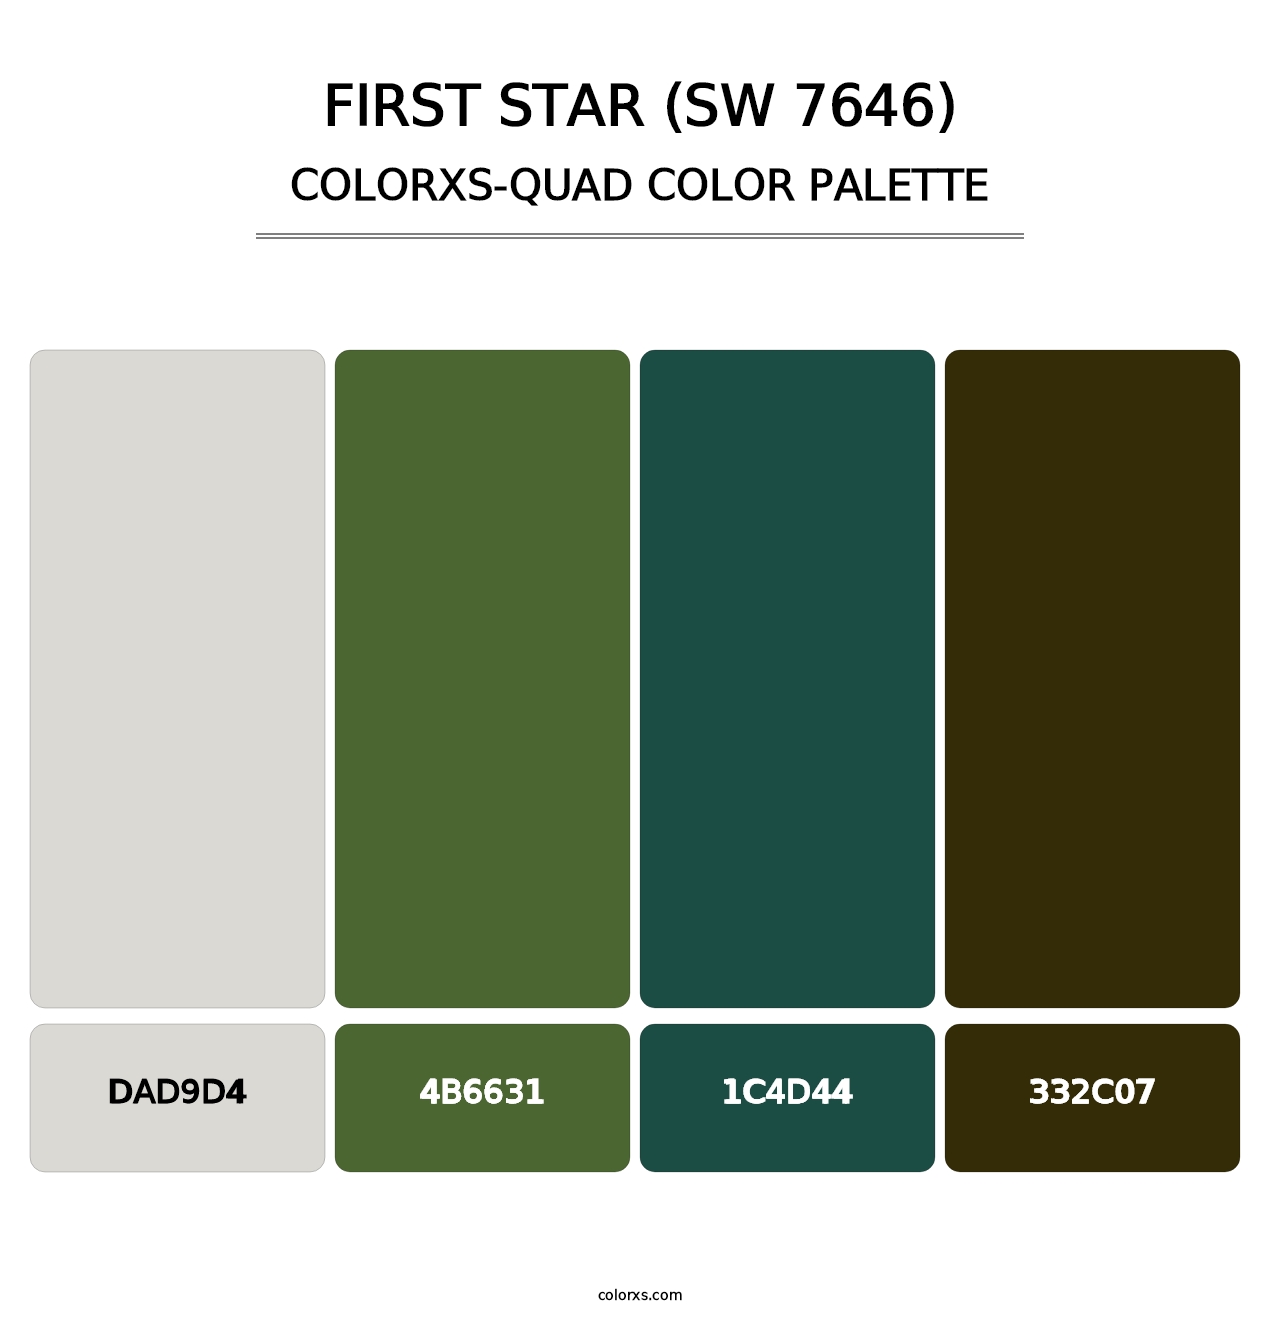 First Star (SW 7646) - Colorxs Quad Palette